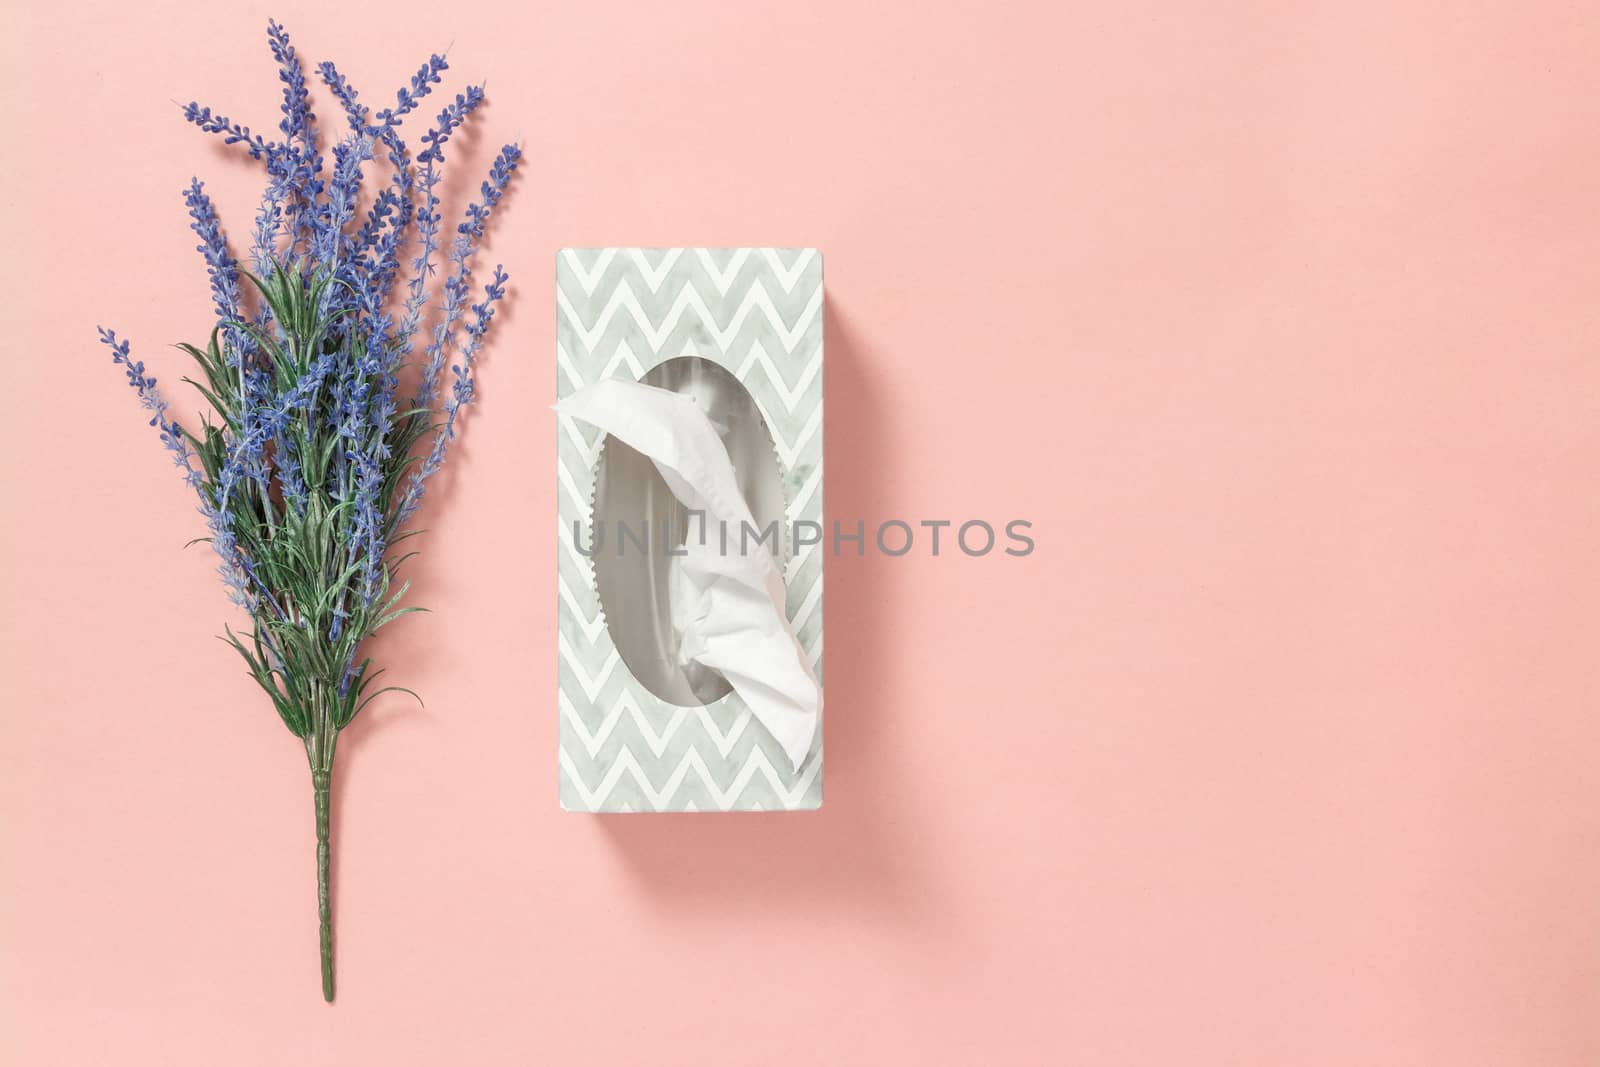 Gray tissue box and blue lavender on pastel pink background.